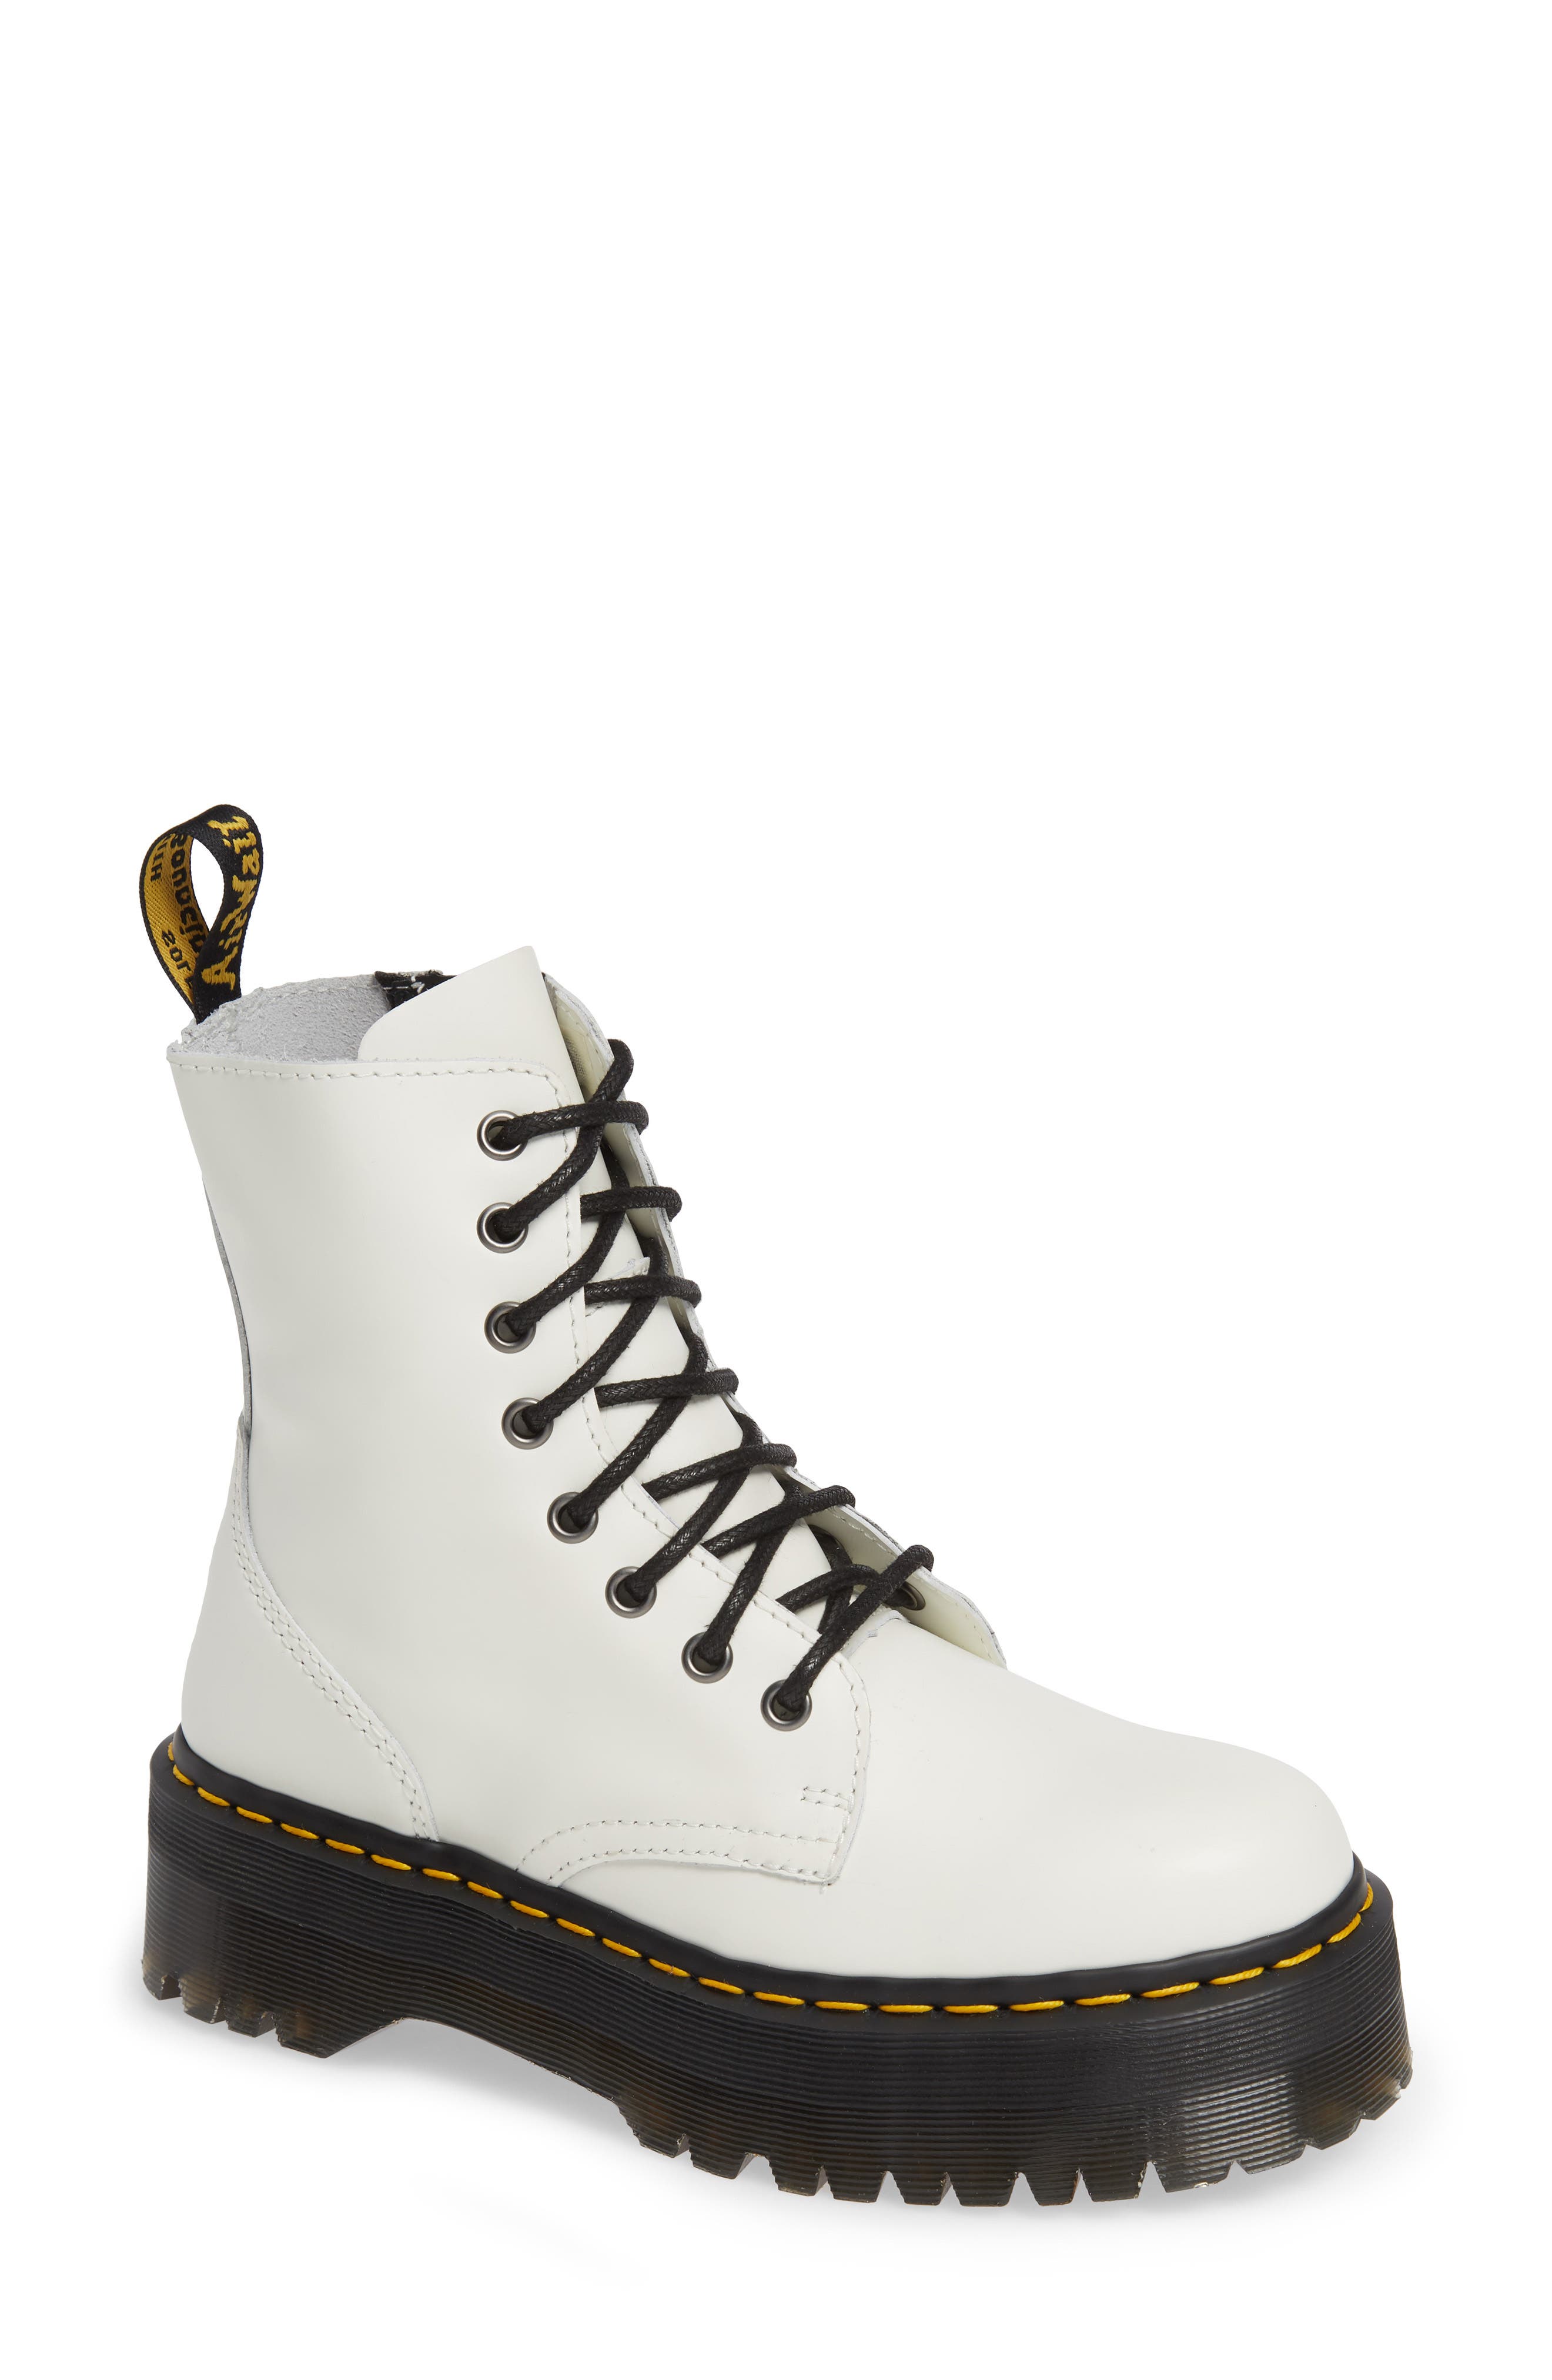 who sells doc martens